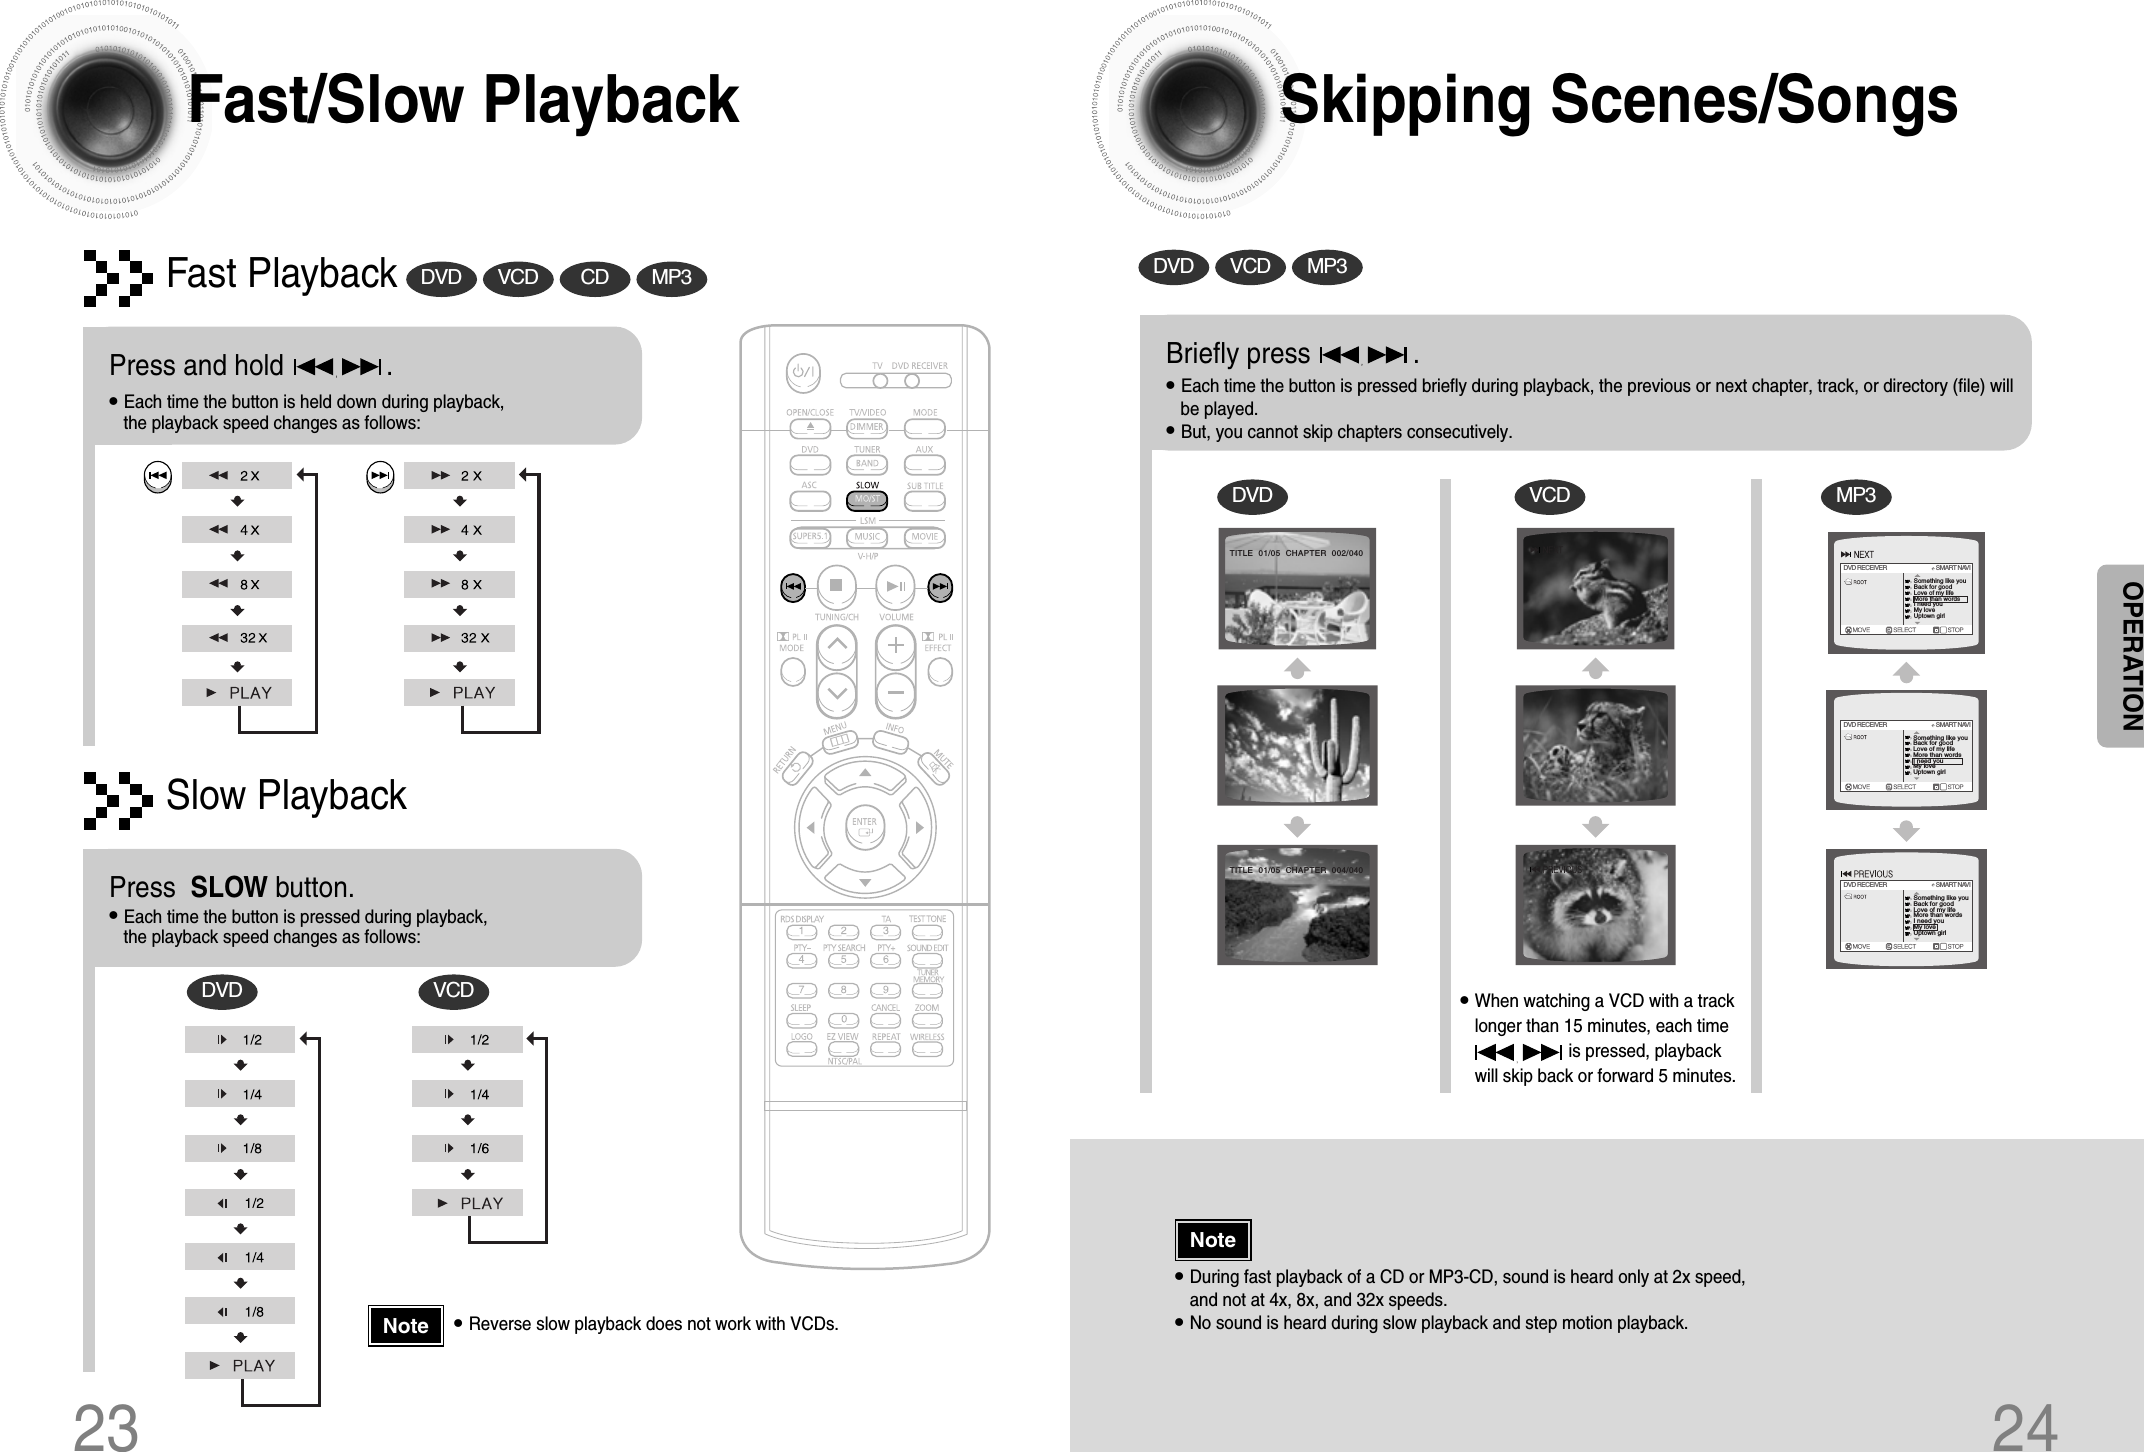 Skipping Scenes/Songs24DVD VCD MP3DVD VCD MP3Briefly press              .•Each time the button is pressed briefly during playback, the previous or next chapter, track, or directory (file) willbe played.•But, you cannot skip chapters consecutively.•During fast playback of a CD or MP3-CD, sound is heard only at 2x speed,and not at 4x, 8x, and 32x speeds.•No sound is heard during slow playback and step motion playback.•When watching a VCD with a tracklonger than 15 minutes, each time      is pressed, playbackwill skip back or forward 5 minutes.TITLE  01/05  CHAPTER  002/040TITLE  01/05  CHAPTER  004/040Fast/Slow PlaybackFast PlaybackDVD VCD CD MP3Press and hold              .•Each time the button is held down during playback, the playback speed changes as follows:Press  SLOW button.•Each time the button is pressed during playback, the playback speed changes as follows:Slow PlaybackDVD VCD23•Reverse slow playback does not work with VCDs.NoteNoteOPERATIONSomething like youBack for goodLove of my lifeMore than wordsI need youMy loveUptown girlDVD RECEIVER                                     SMART NAVISomething like youBack for goodLove of my lifeMore than wordsI need youMy loveUptown girlDVD RECEIVER                                     SMART NAVISomething like youBack for goodLove of my lifeMore than wordsI need youMy loveUptown girlDVD RECEIVER                                     SMART NAVI